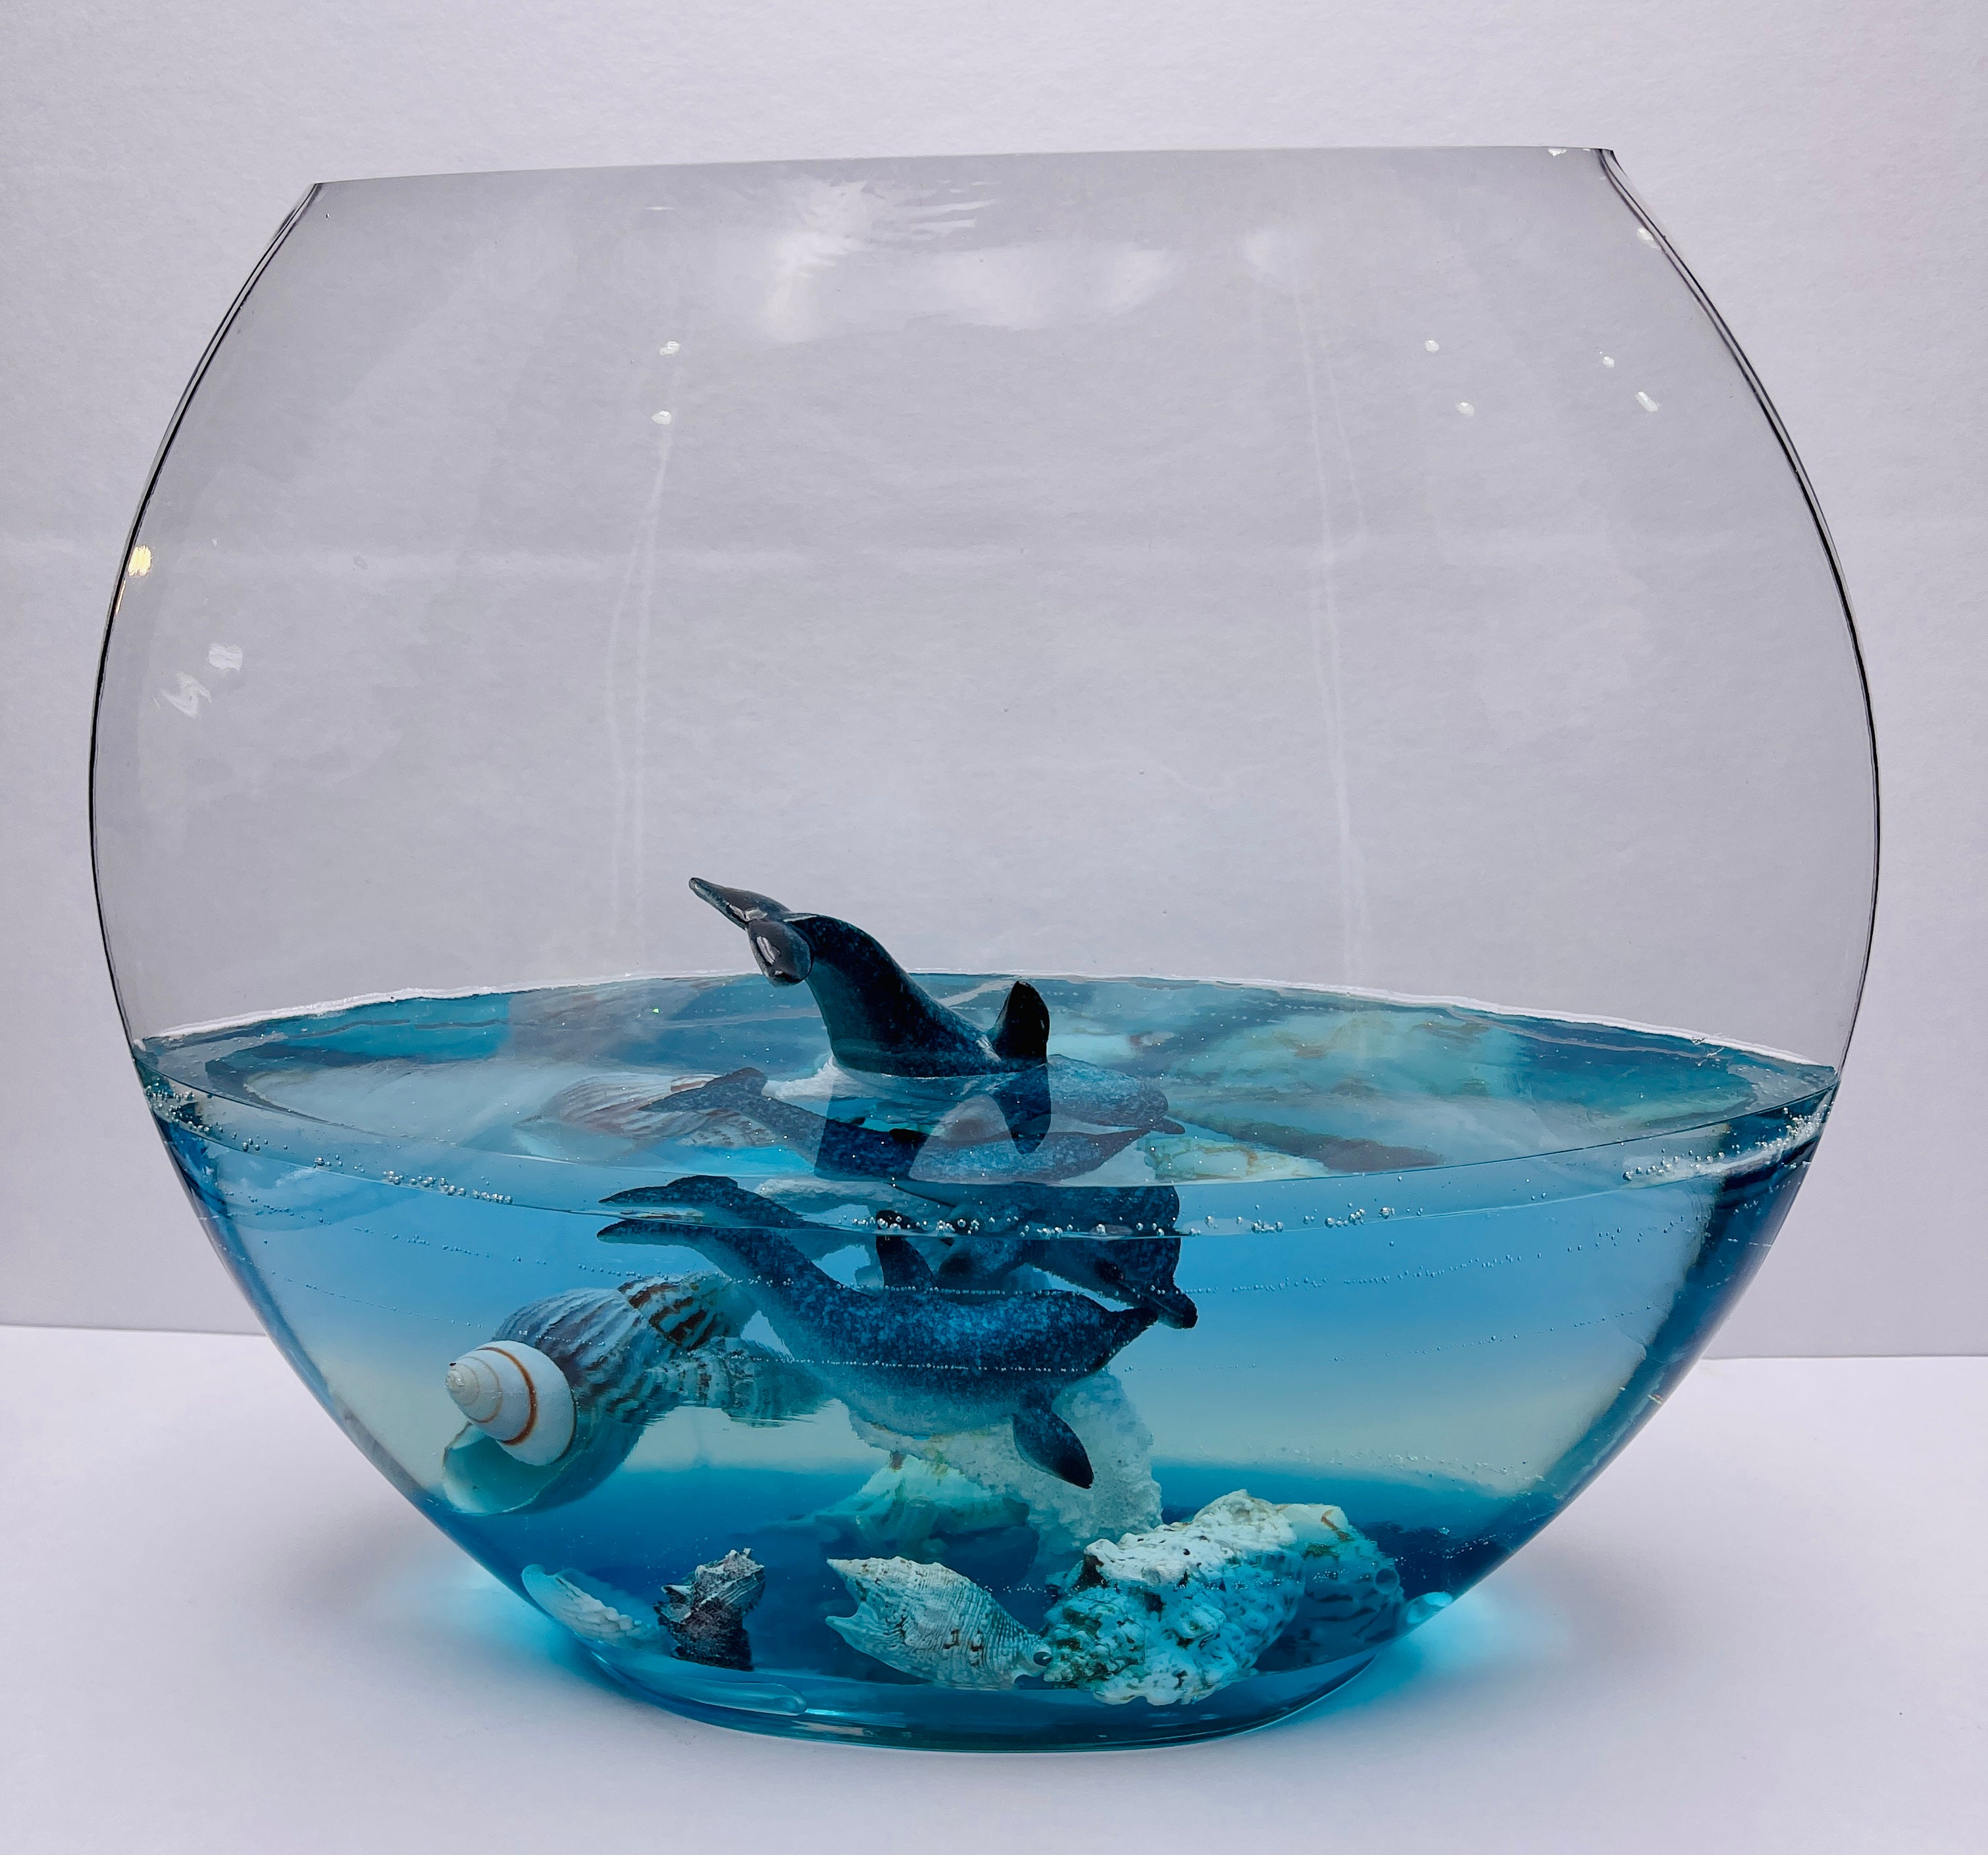 Giant Fish Bowl with Dolphins